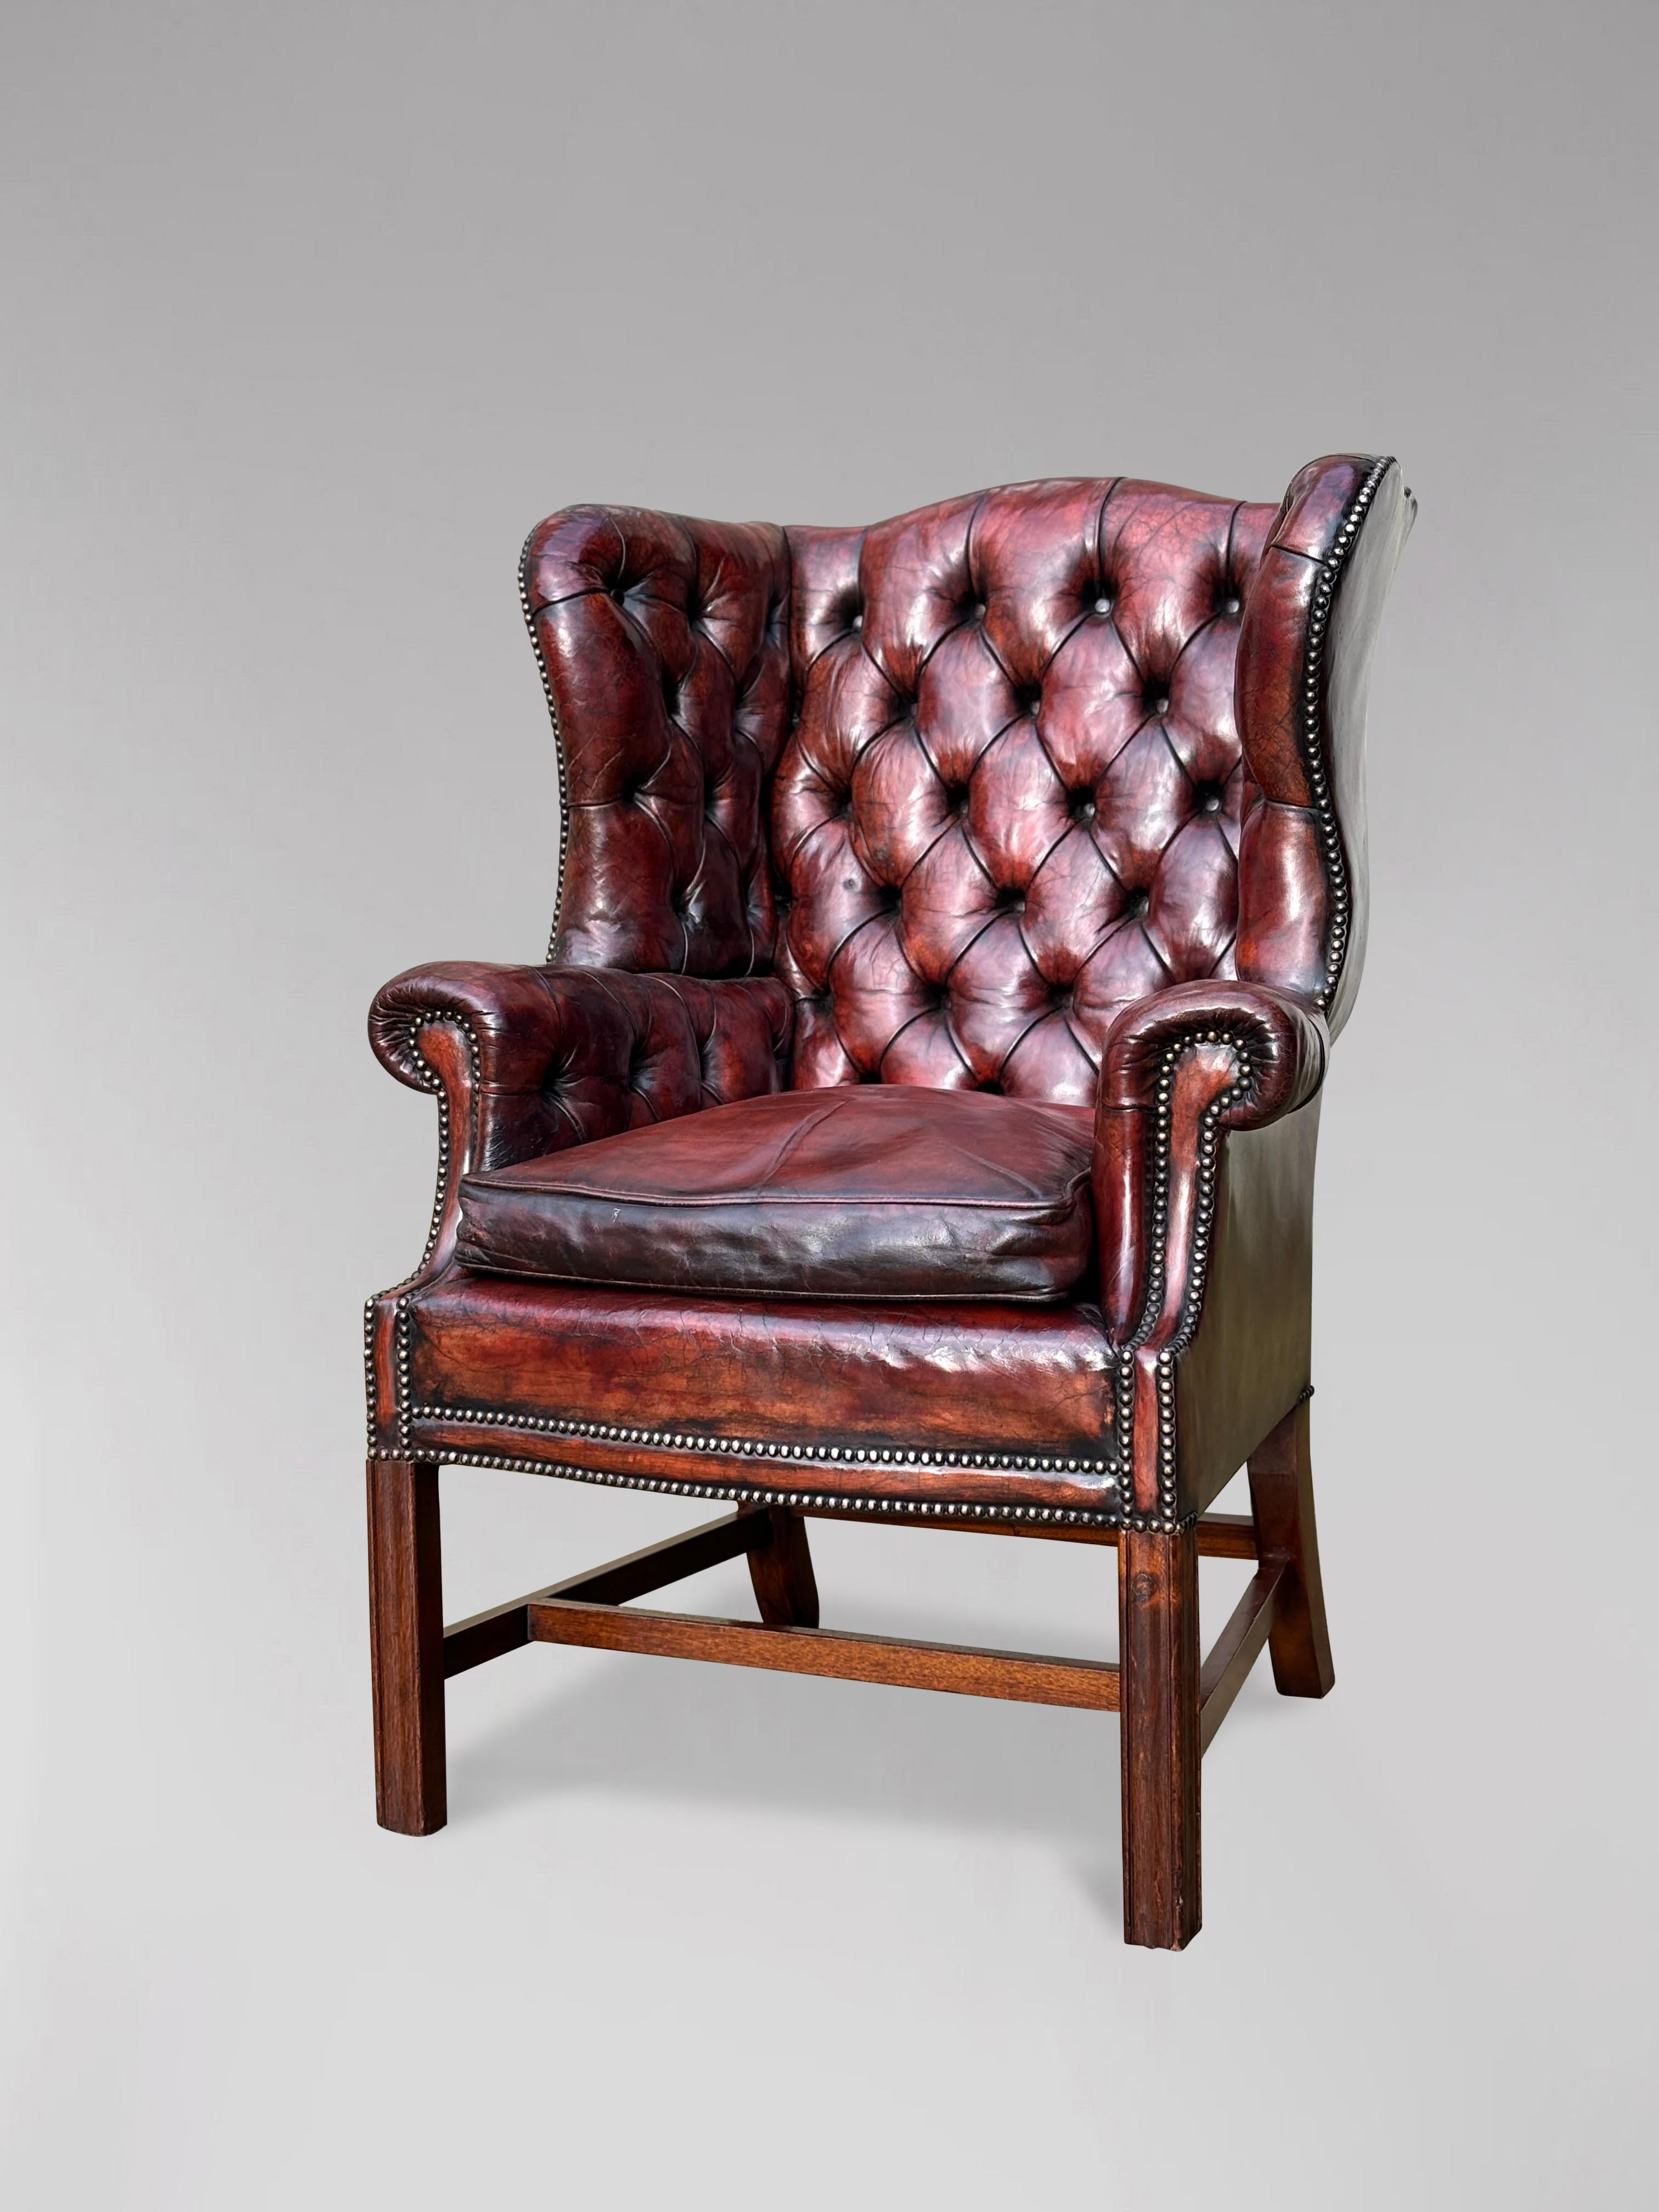 19th Century, Georgian, Burgundy Leather Wing Armchair In Good Condition For Sale In Petworth,West Sussex, GB